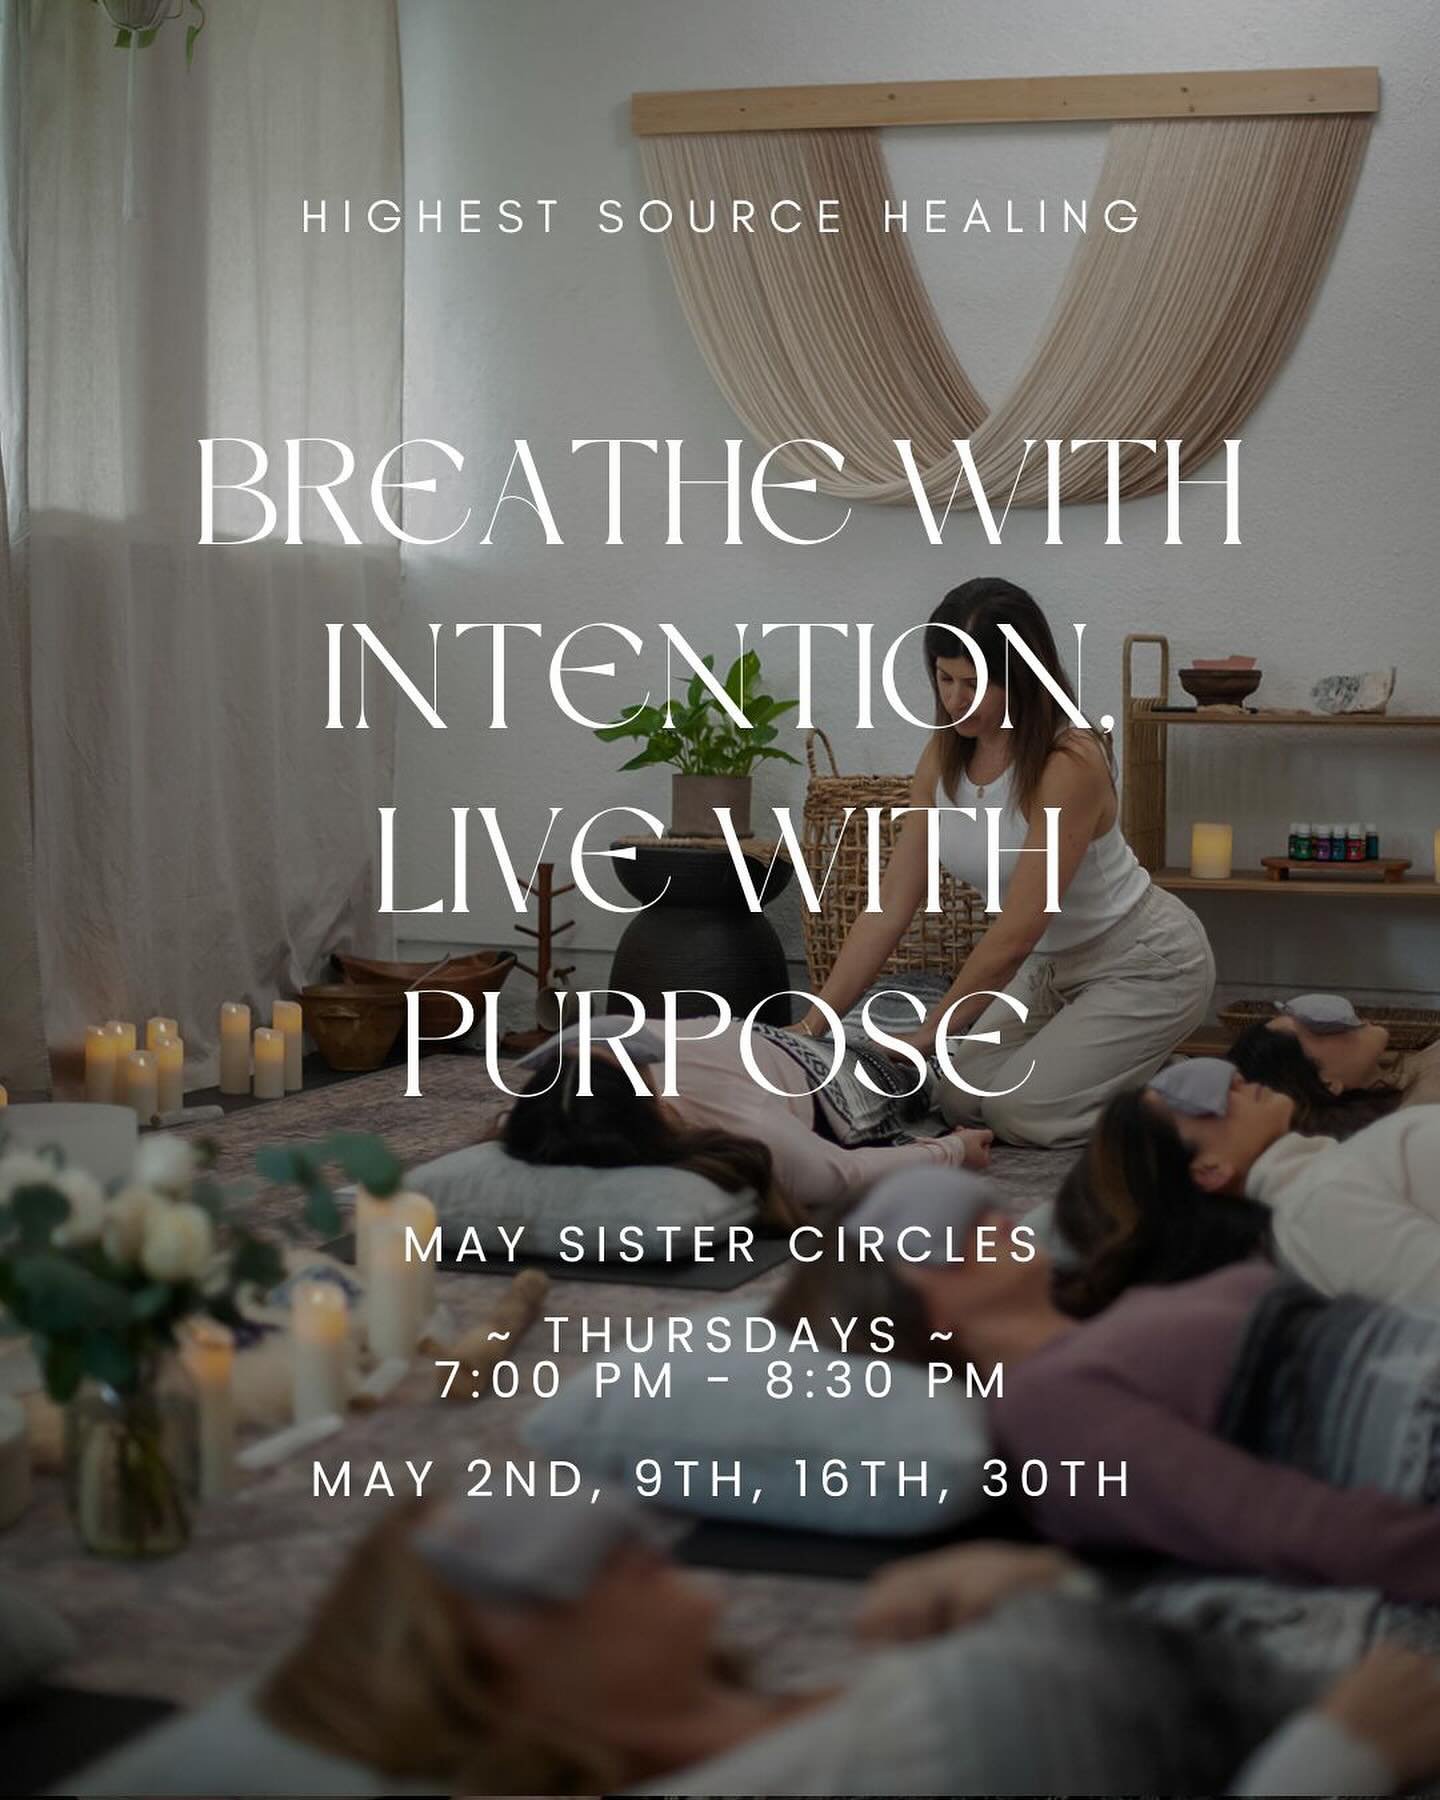 Allow yourself a time to seek clarity and connection in the midst of your busy life. 

Take a moment to be intentional with your breath so you can live with authenticity and purpose!

Join our May Breathwork Circles where you will feel empowered to f